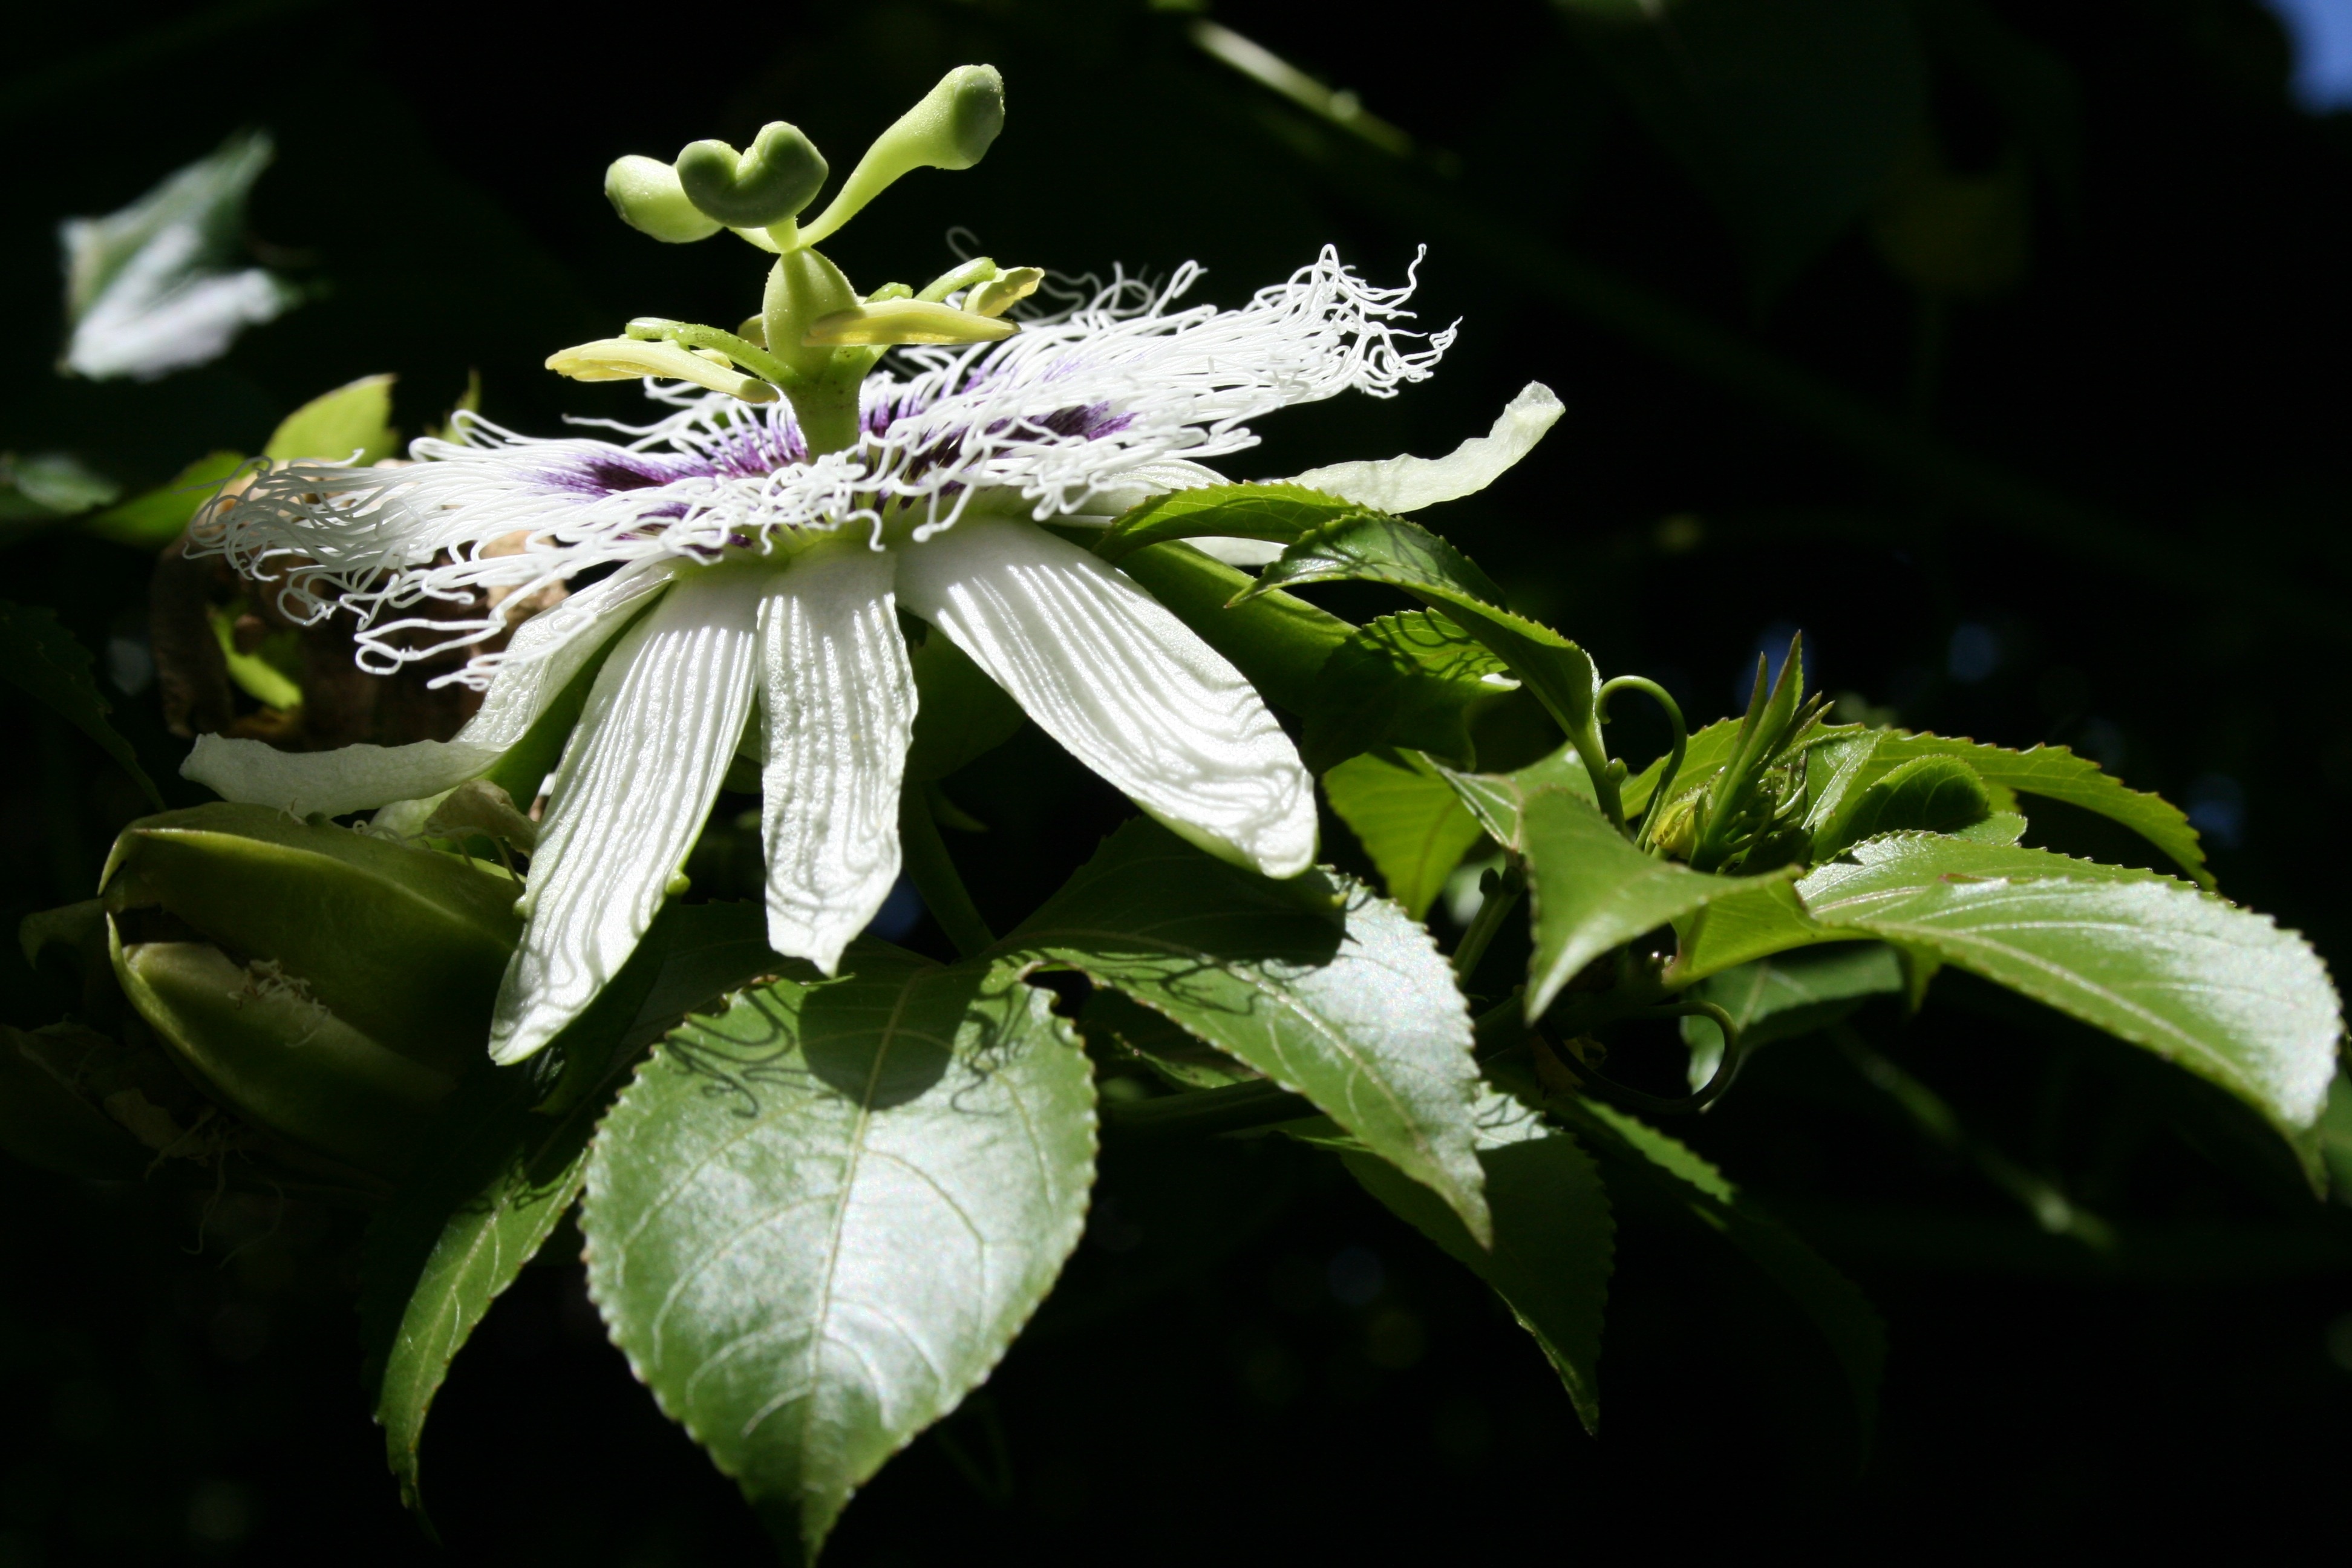 white and purple passion flower